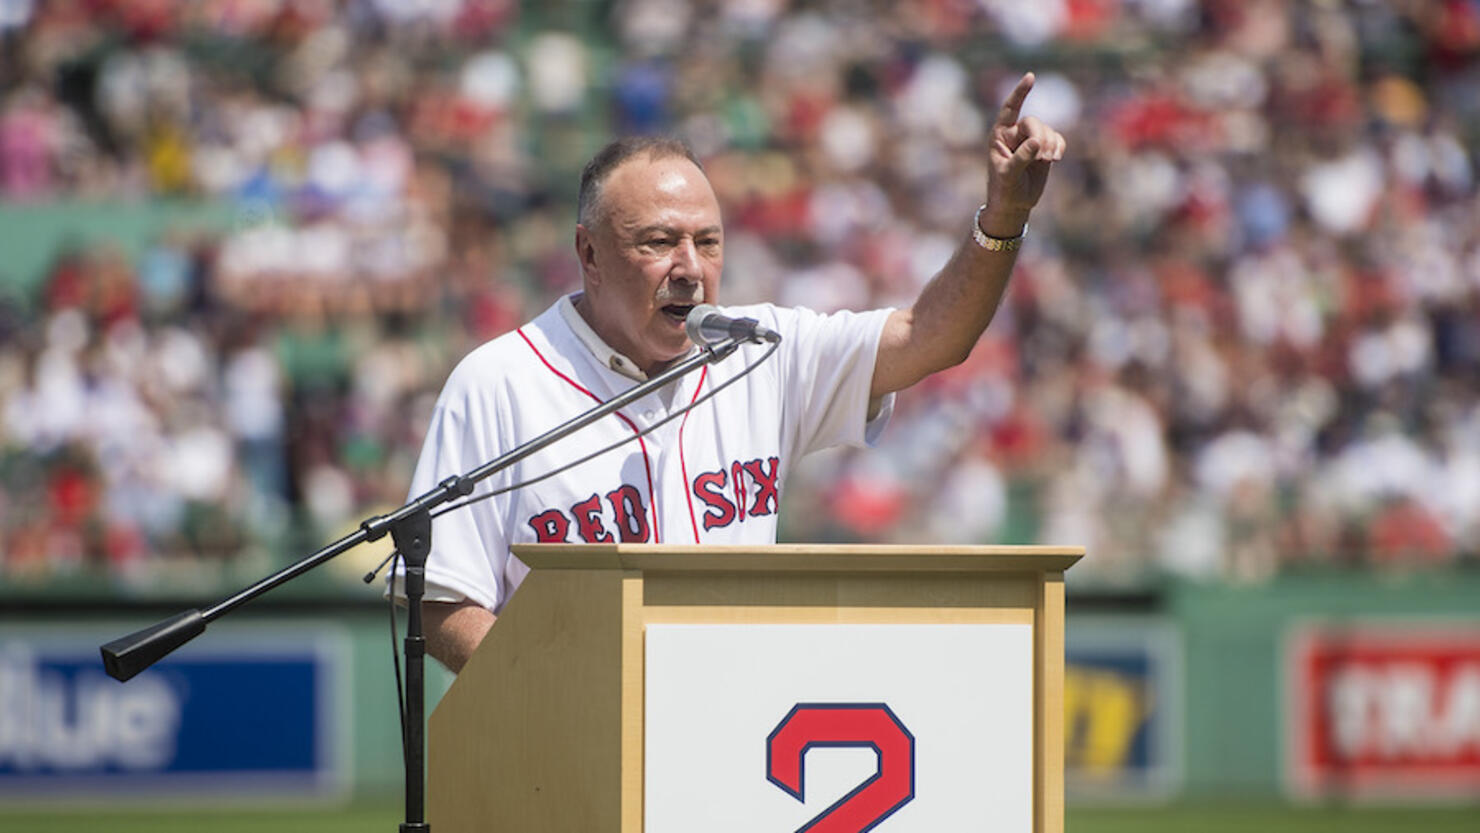 Red Sox will wear a commemorative patch to honor Jerry Remy during the 2022  season - The Boston Globe